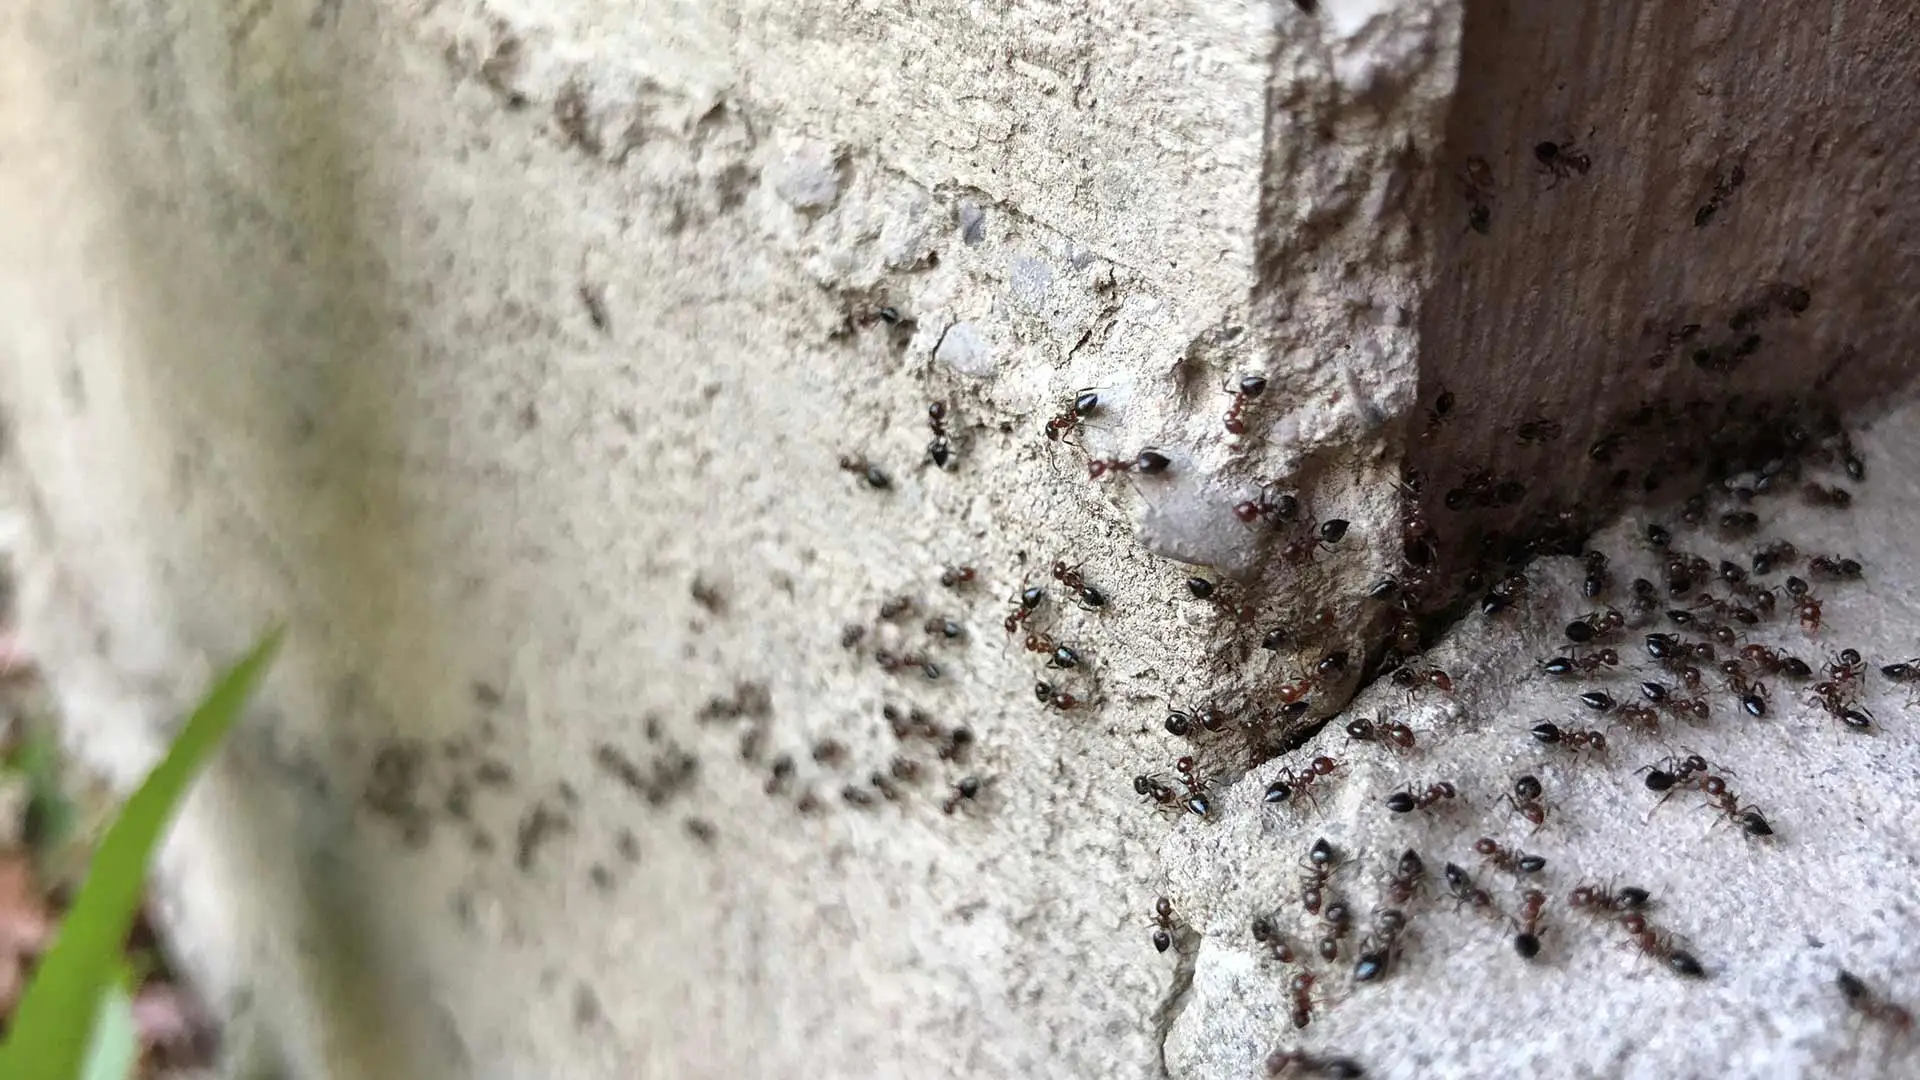 This Treatment Will Prevent Bugs from Getting Cozy inside Your Home This Winter